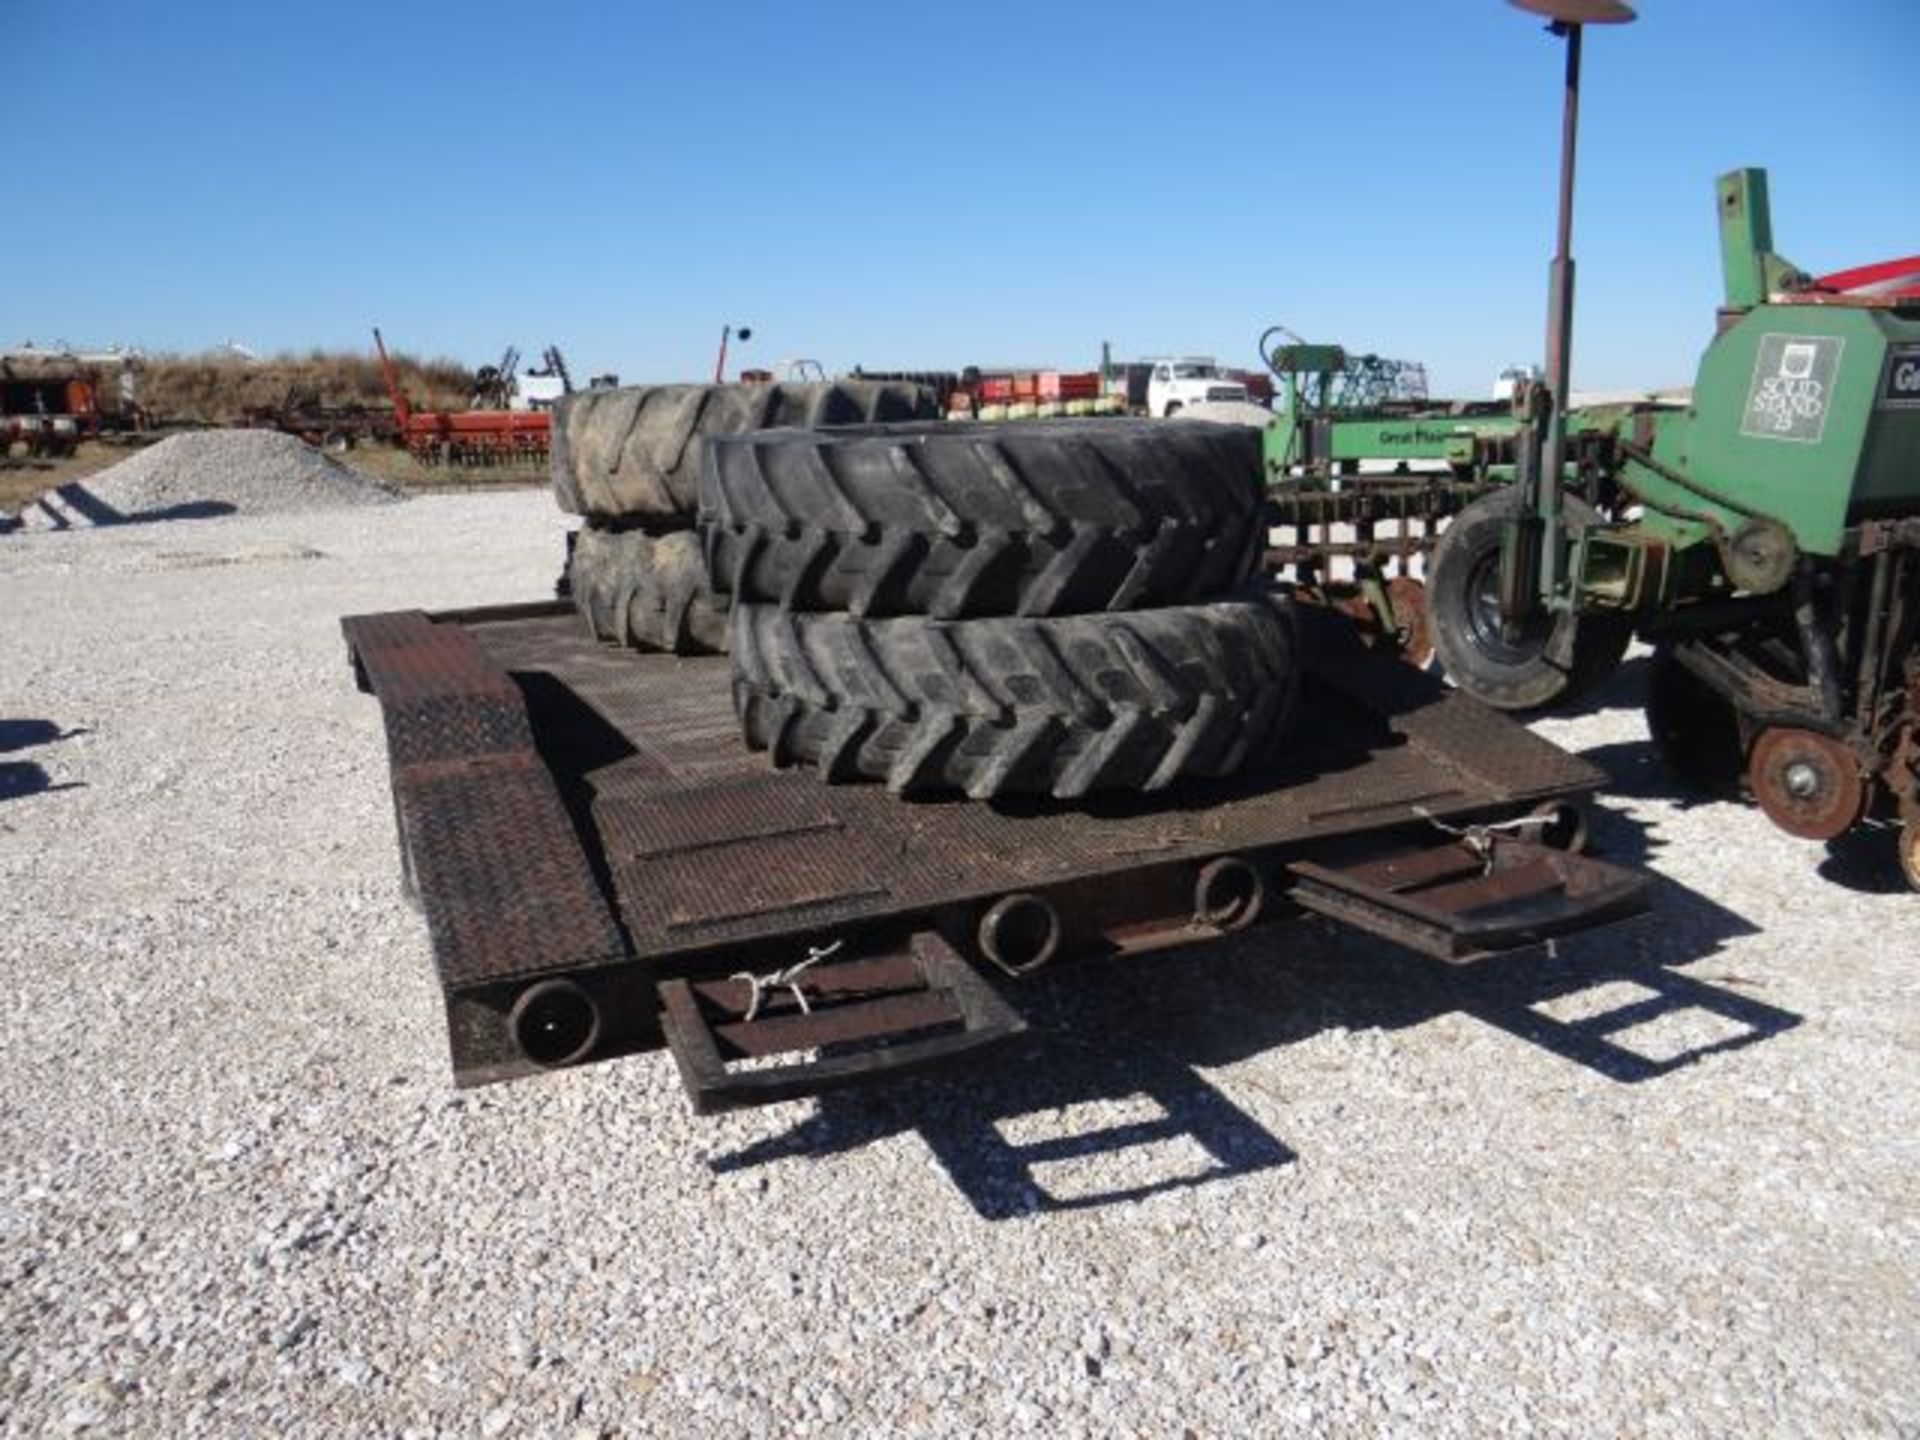 Homemade Skid Steer Trailer 12'x6'6" Steel Bed, Tandem Axle, Bumper Hitch, No Title - Image 3 of 3